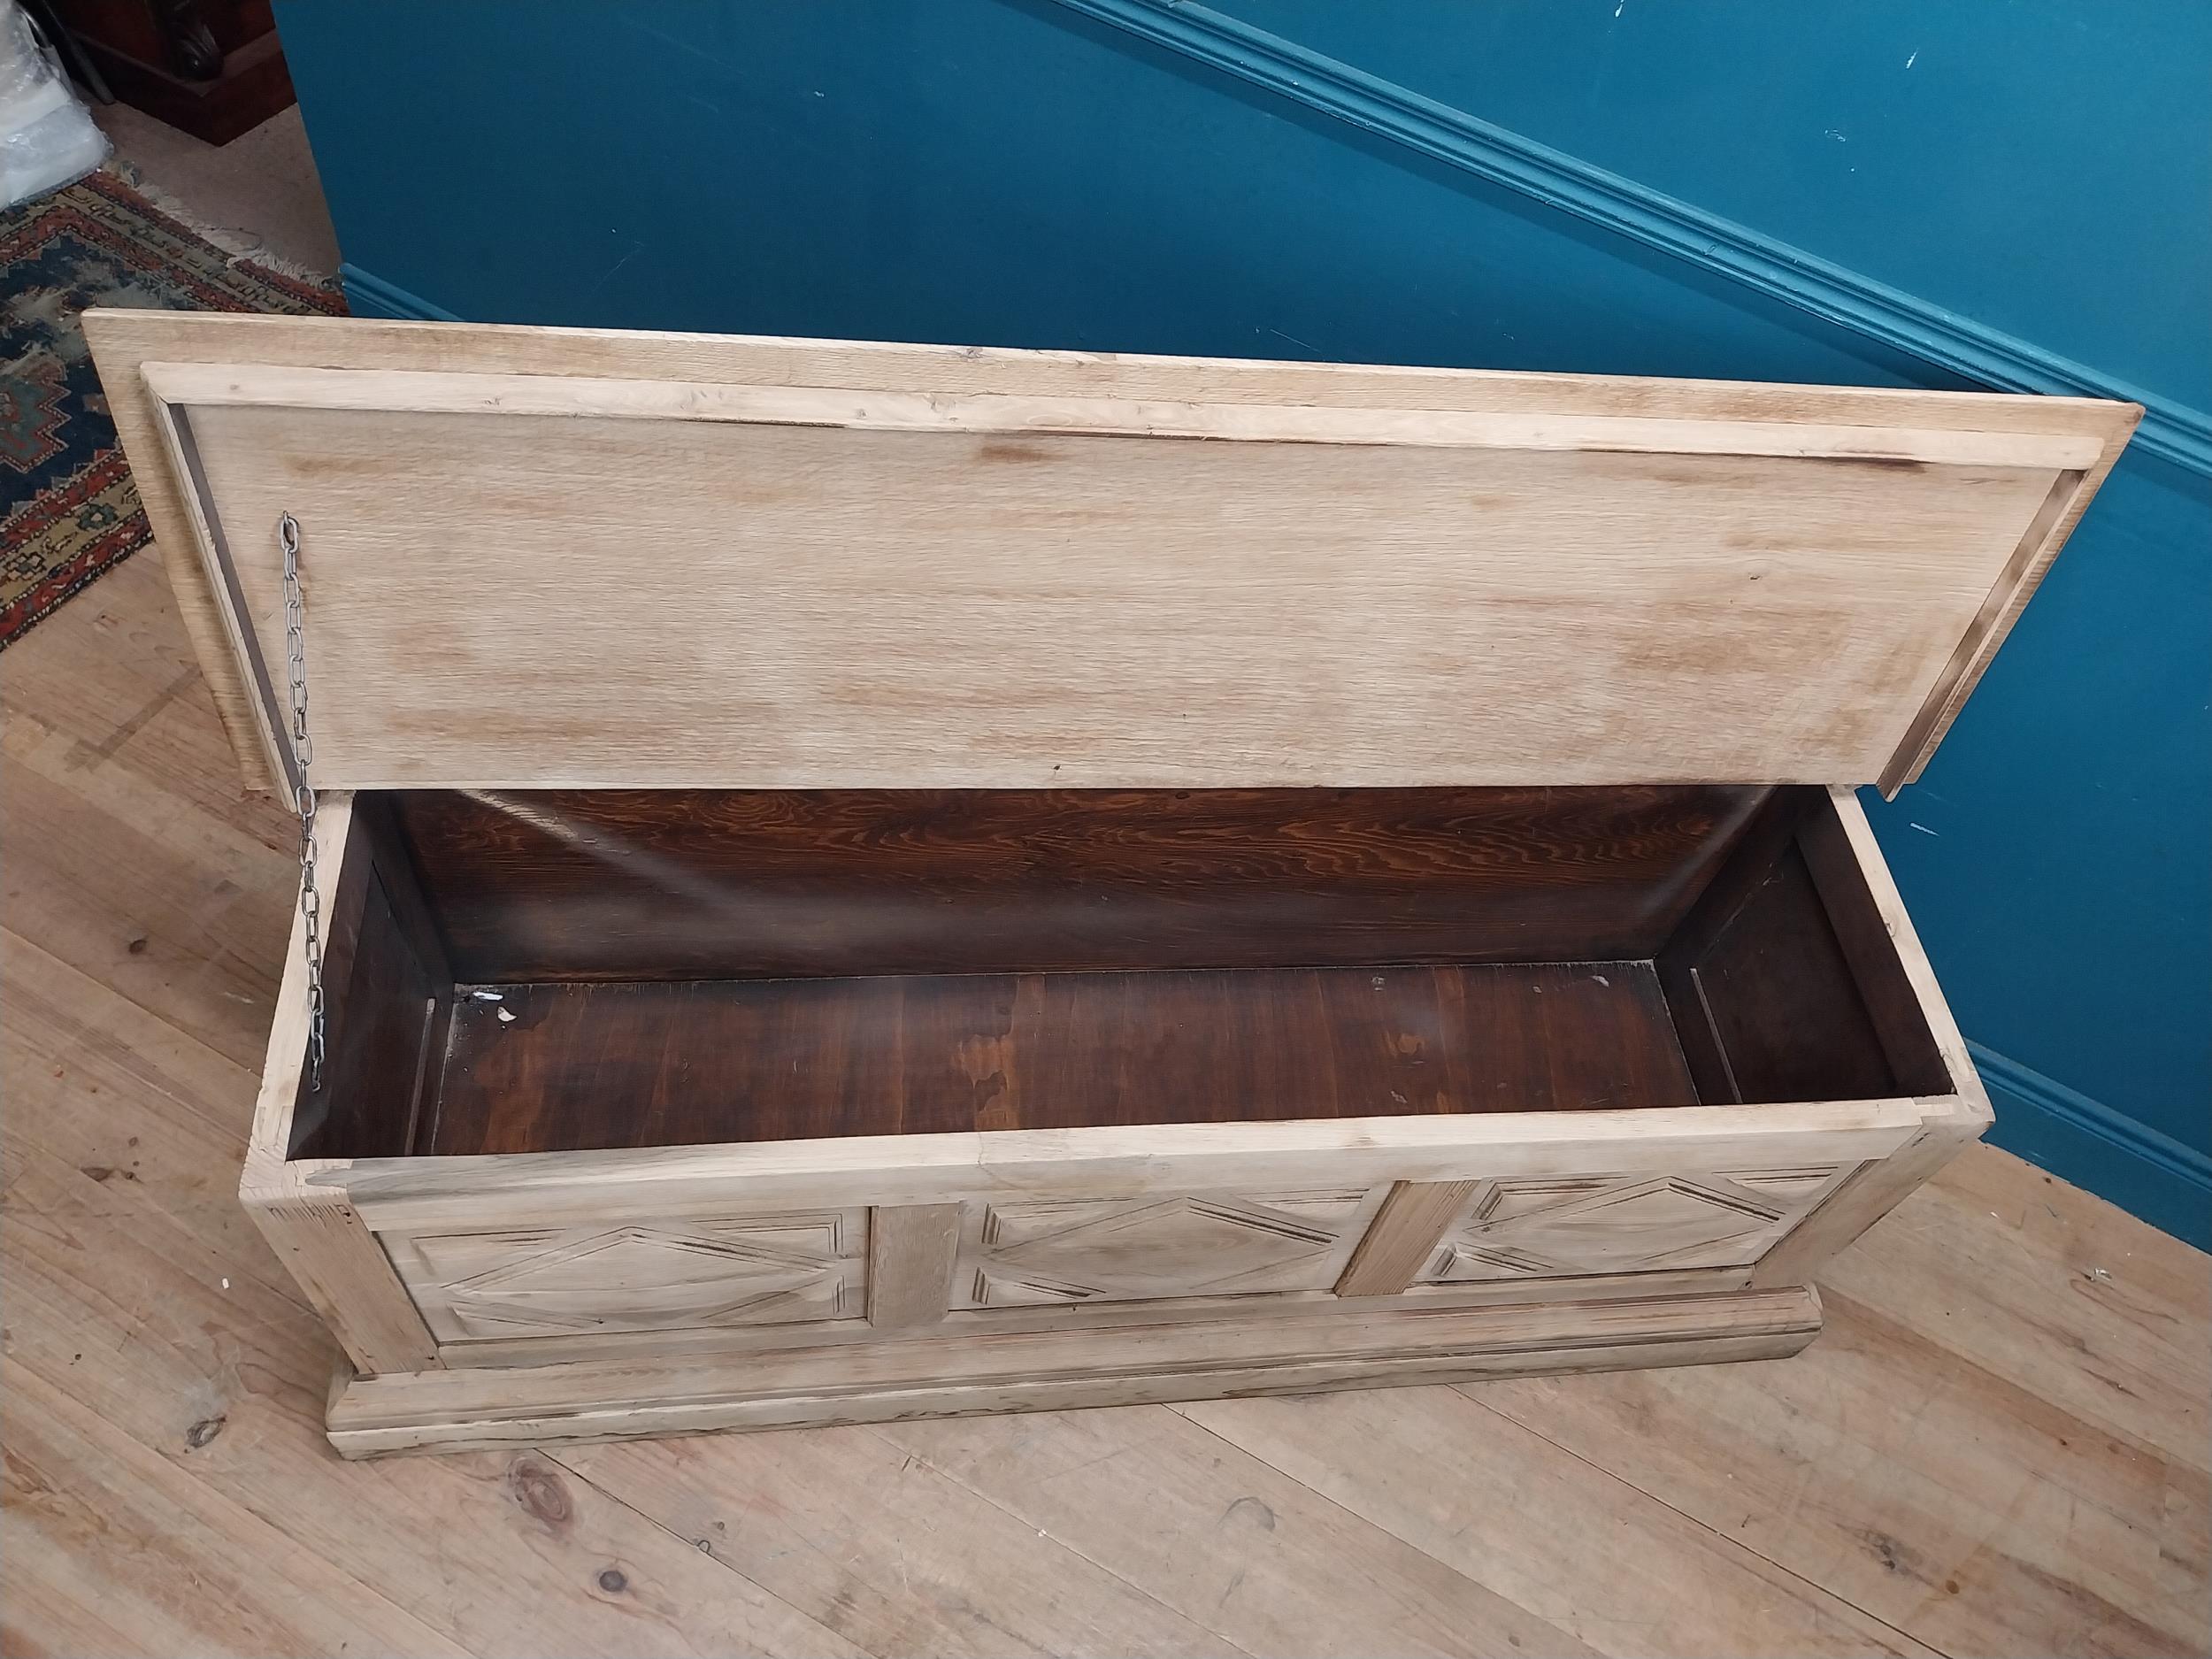 Early 20th C. bleached oak blanket box with metal mounts. {57 cm H x 162 cm W x 52 cm D}. - Image 6 of 6